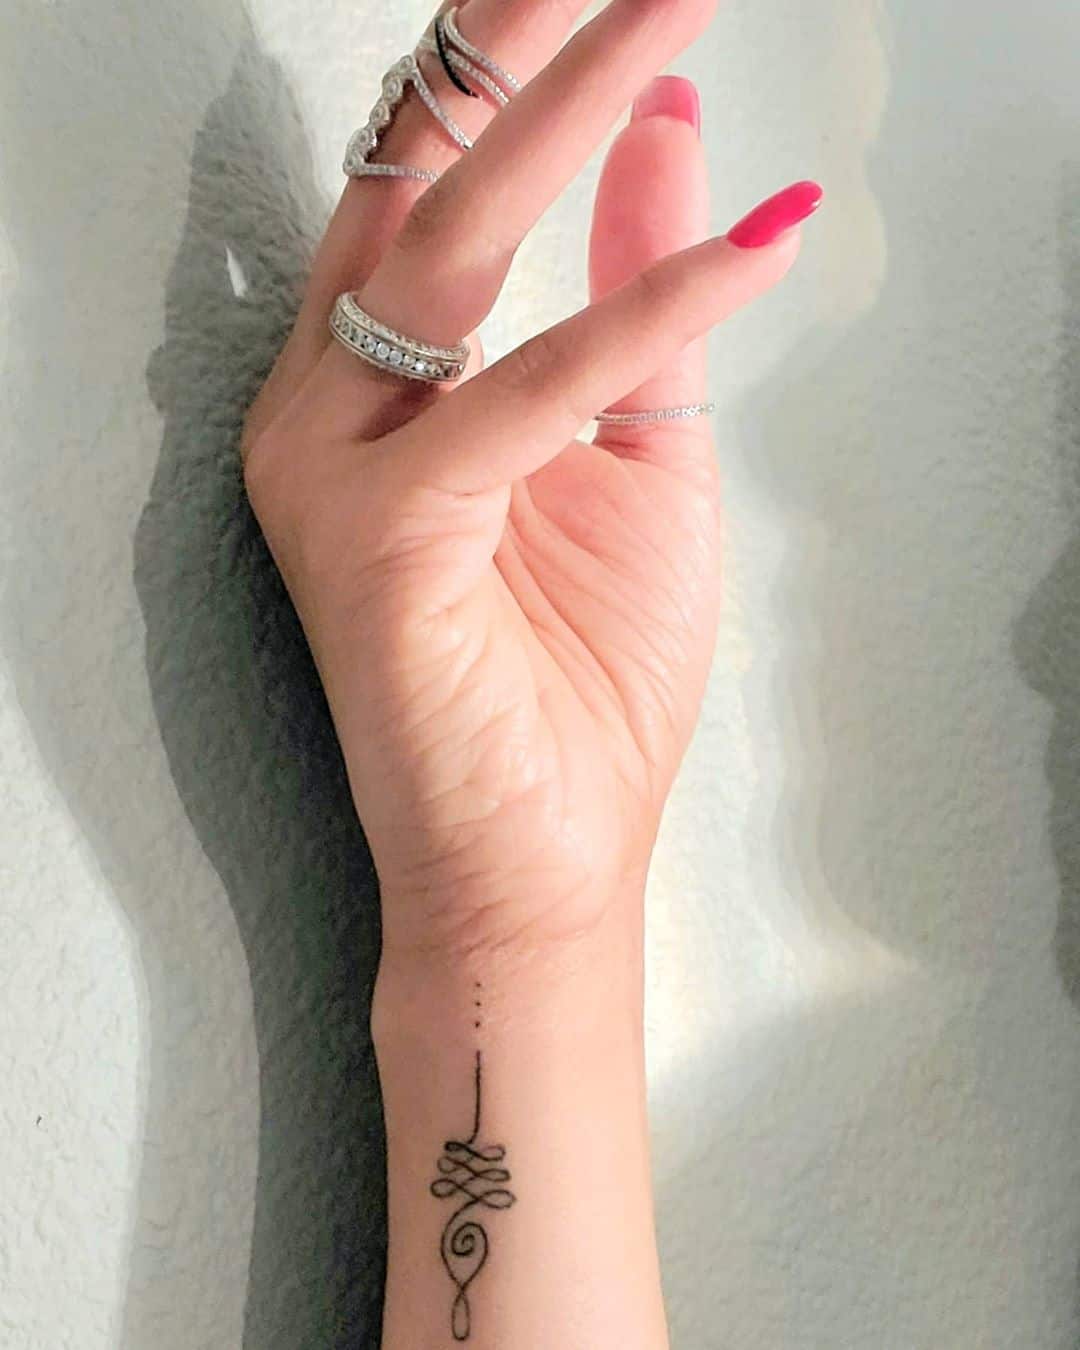 50 Small Wrist Tattoo Ideas  Get Inspiration For Your Next Tattoo